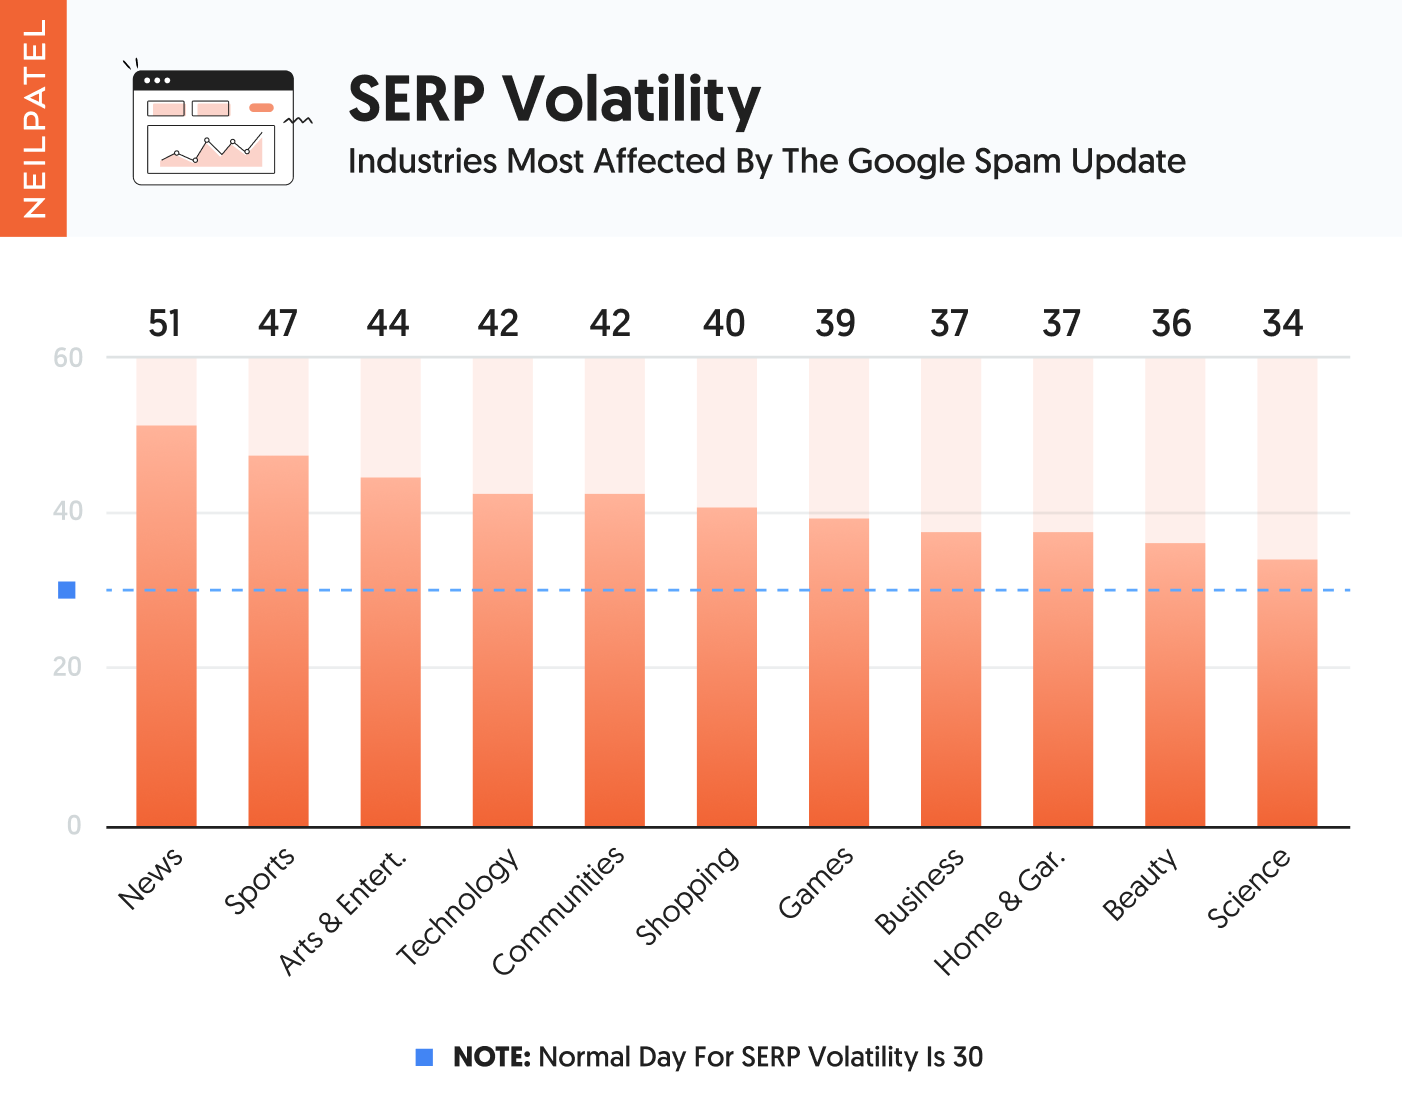 SERP-Volatility-Industries-most-affected-by-the-Google-spam-update